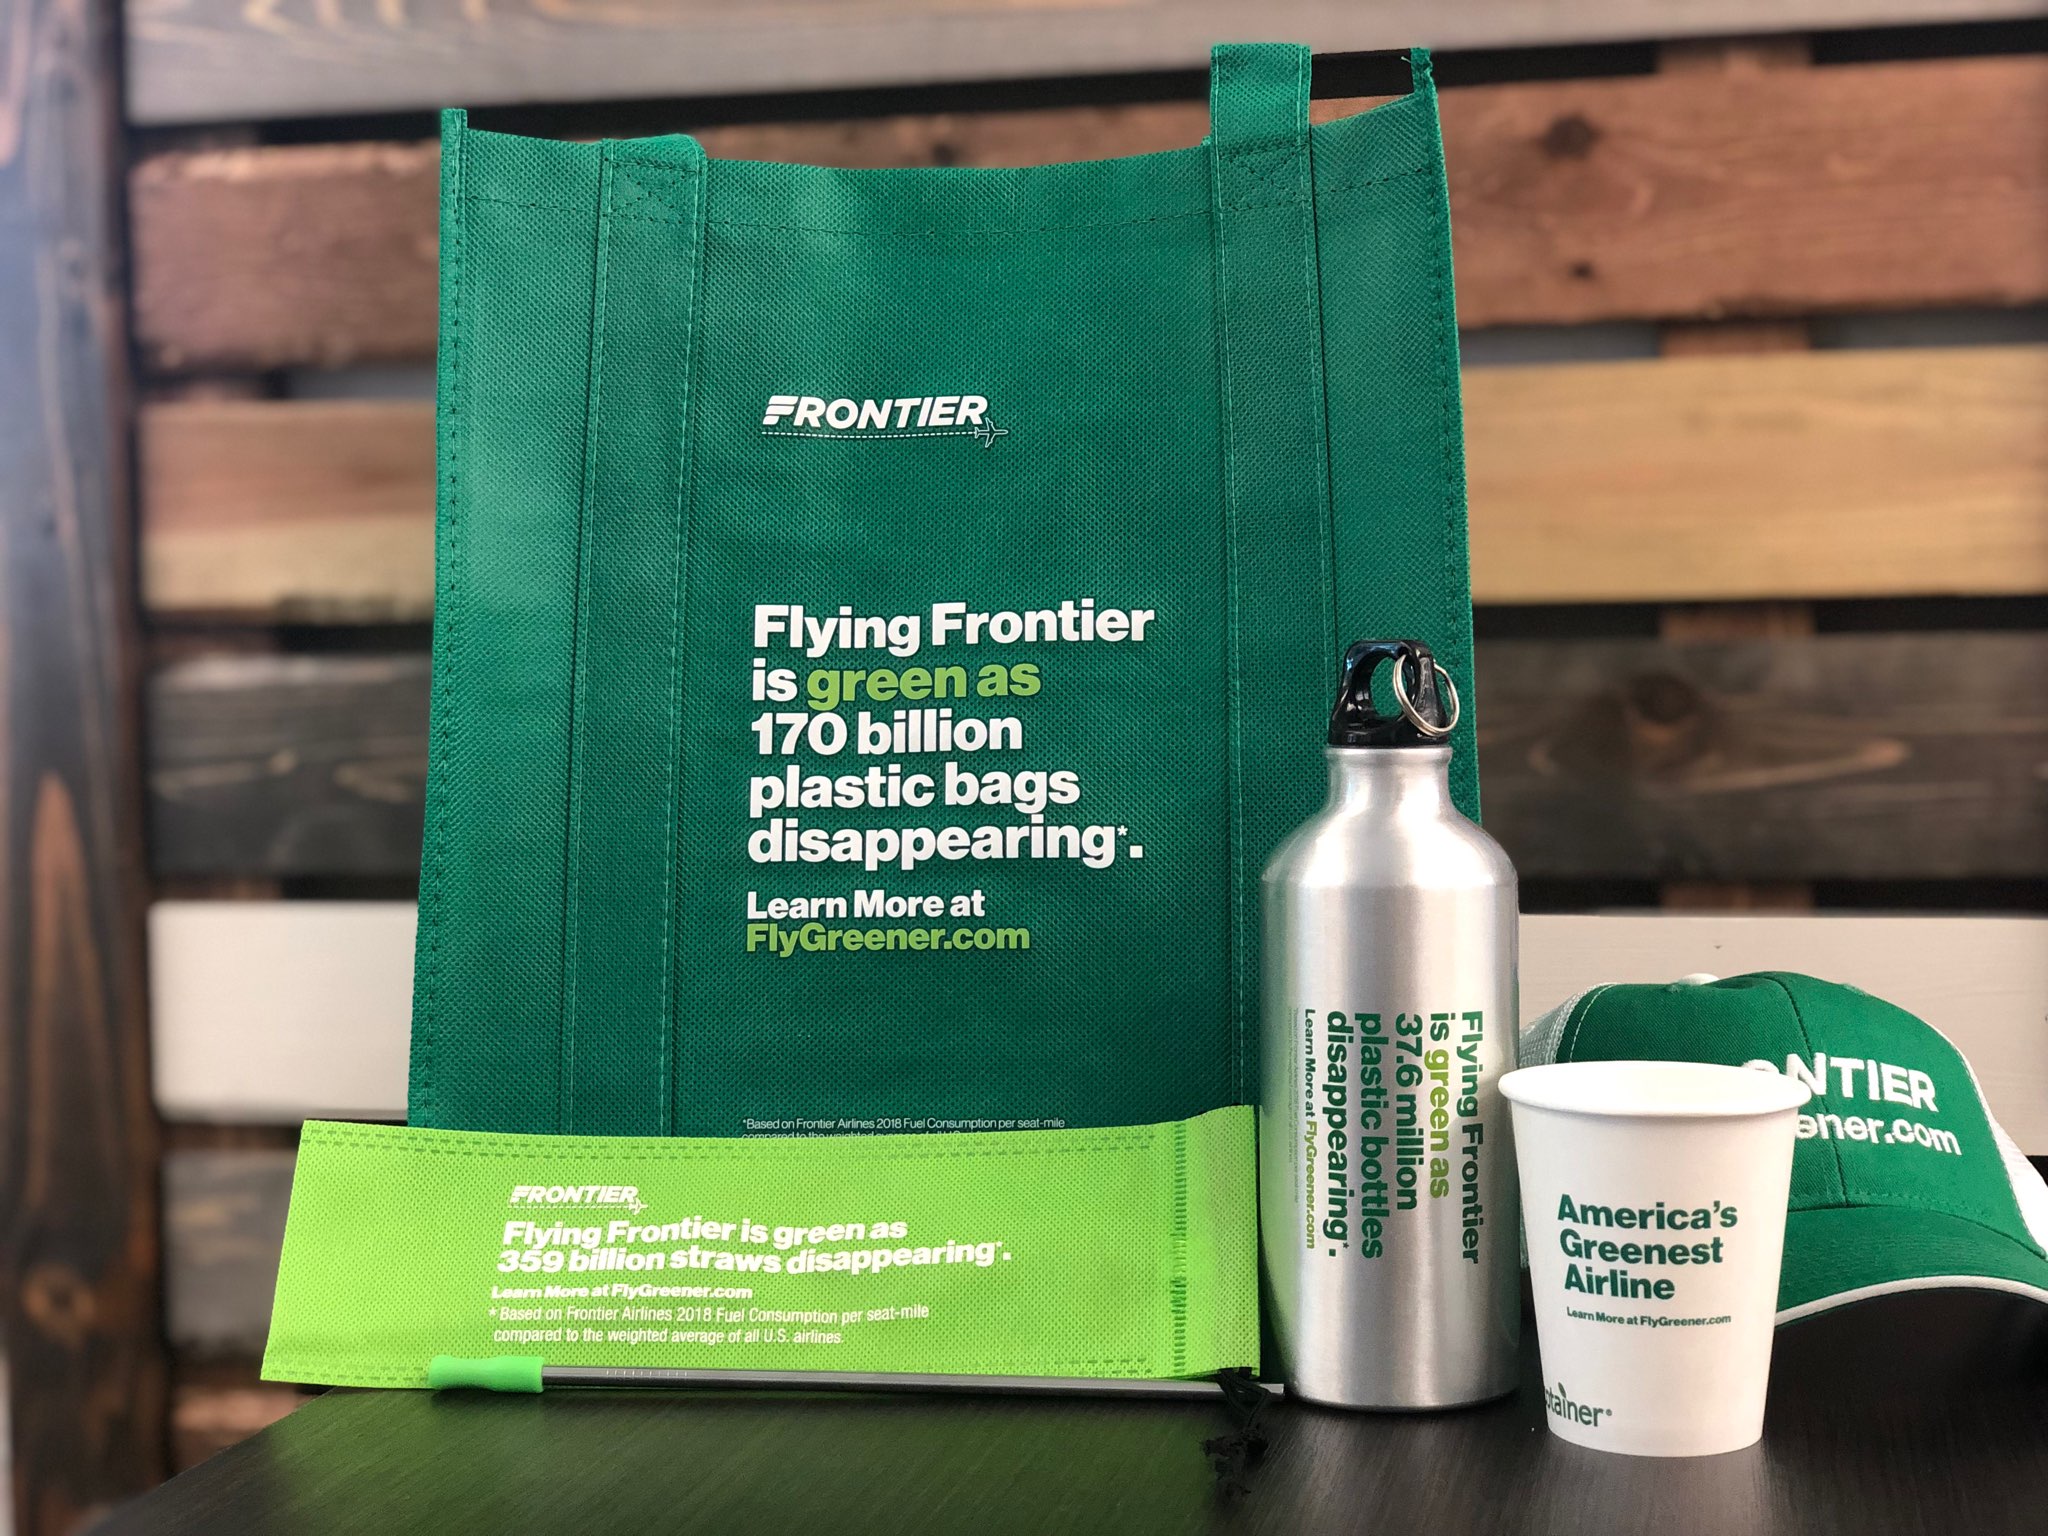 America's Greenest Flight is focused on sustainability on every level. Service items utilized include compostable cold cups, hot cups and napkins made from recycled materials and bamboo stir sticks. 